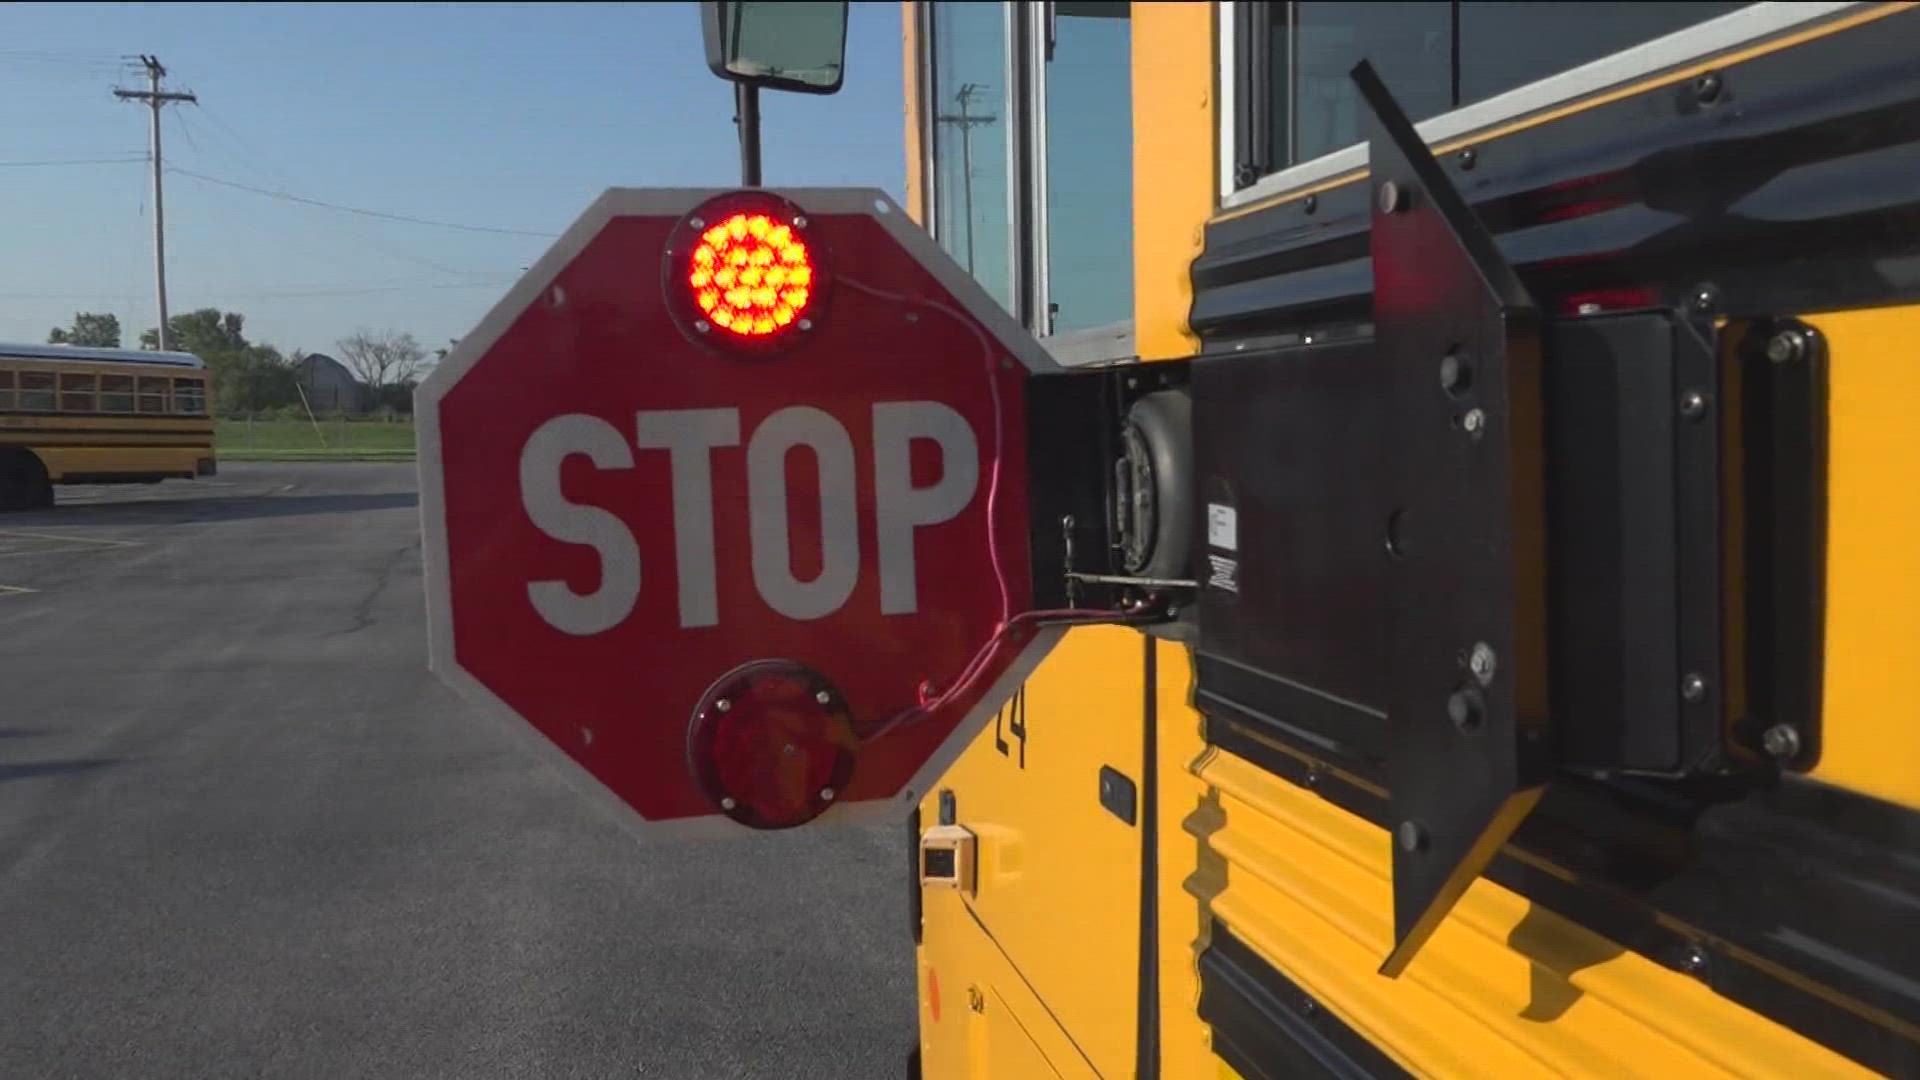 WTOL 11's Trent Croci rode along with troopers enforcing traffic laws in school zones and around school buses.